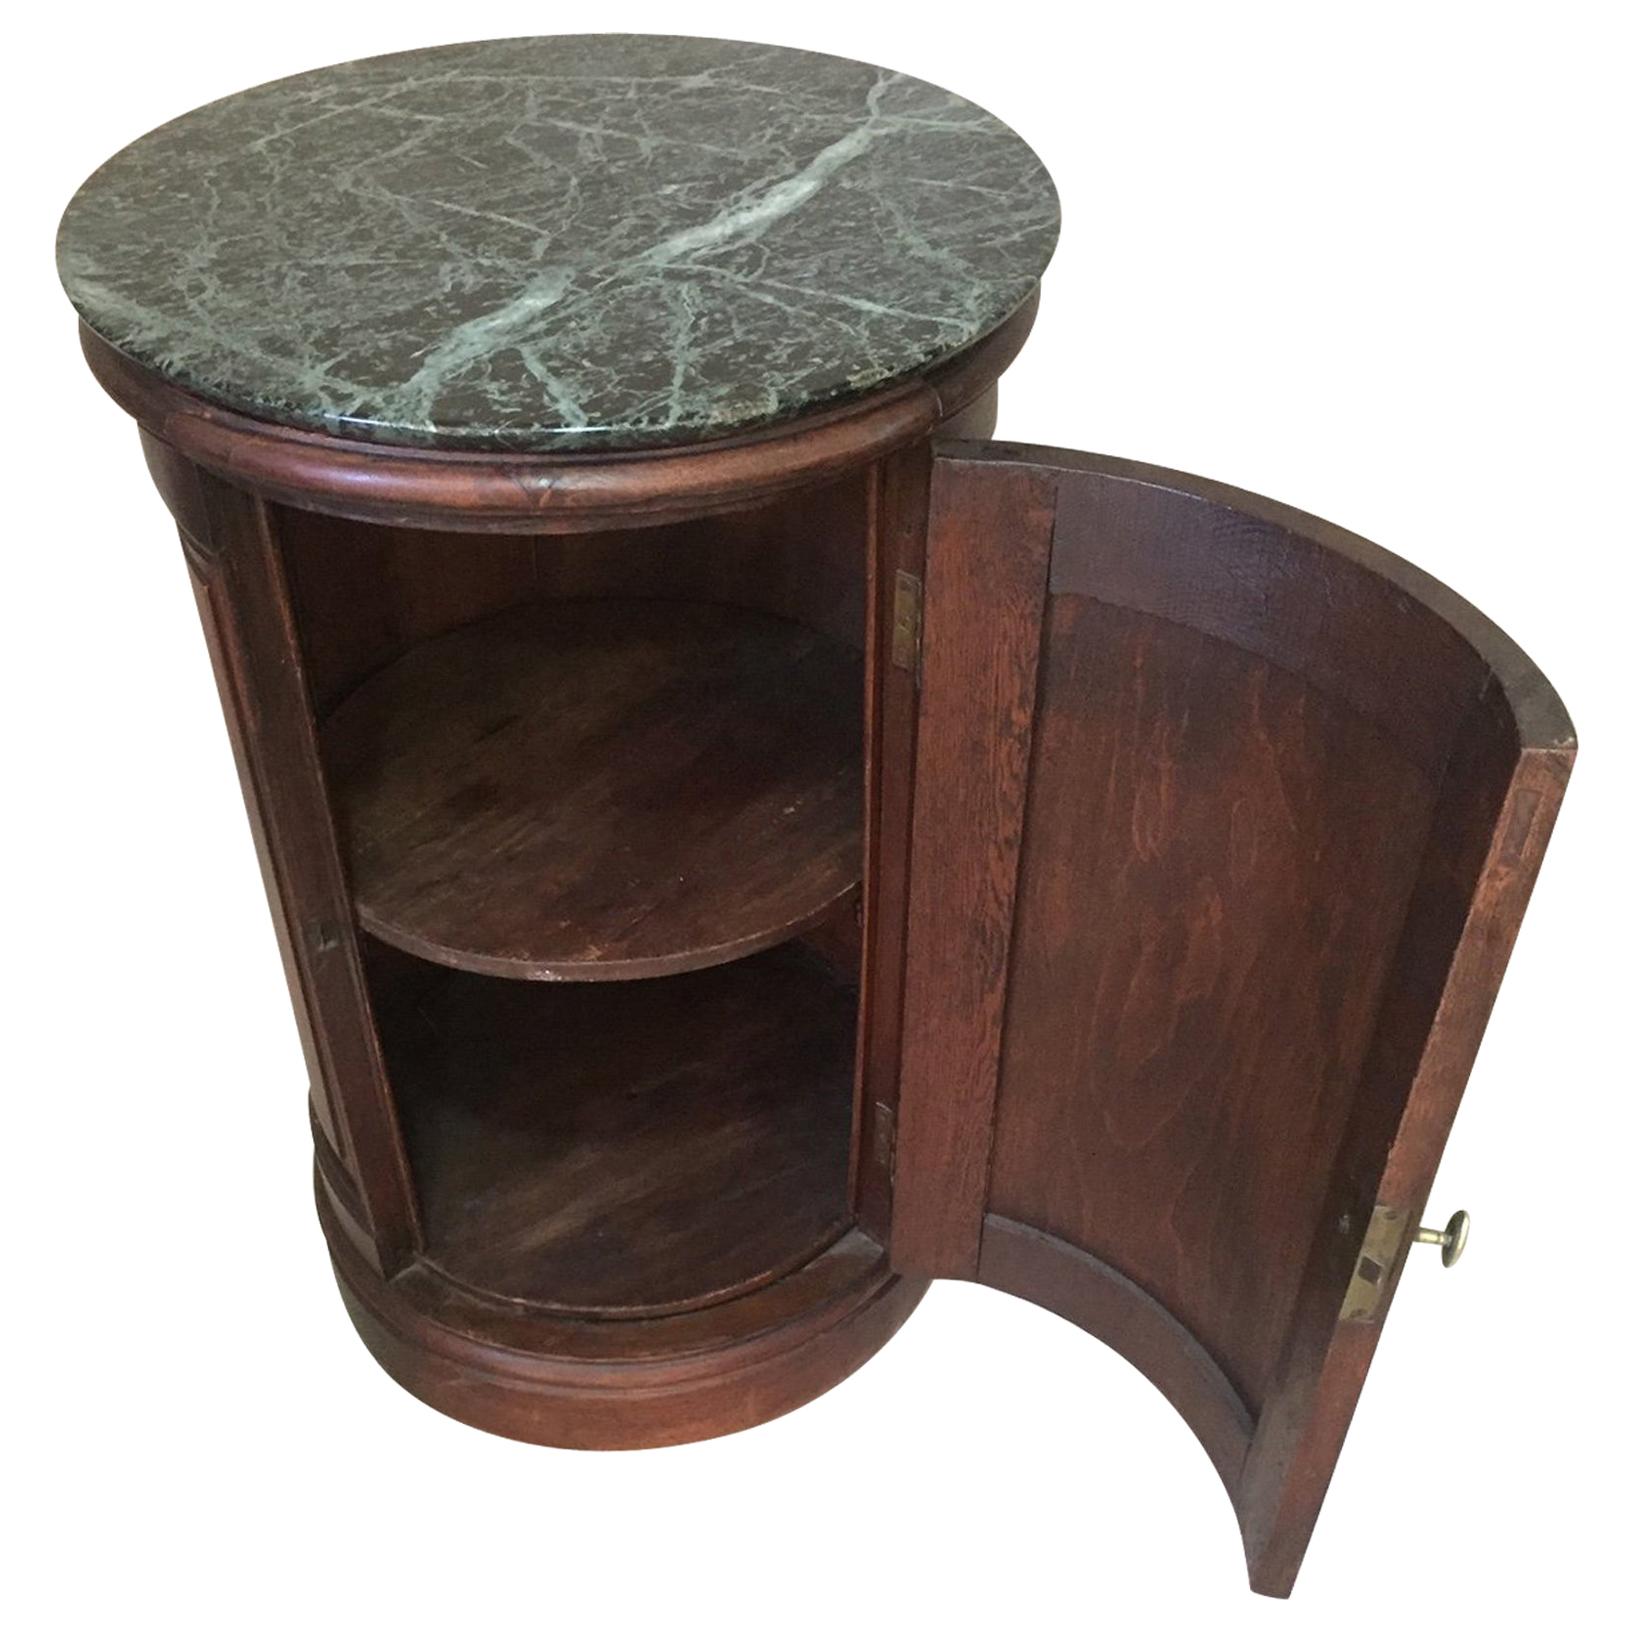 19th Century Walnut Empire Style French Opening Side Table Called "Somno"